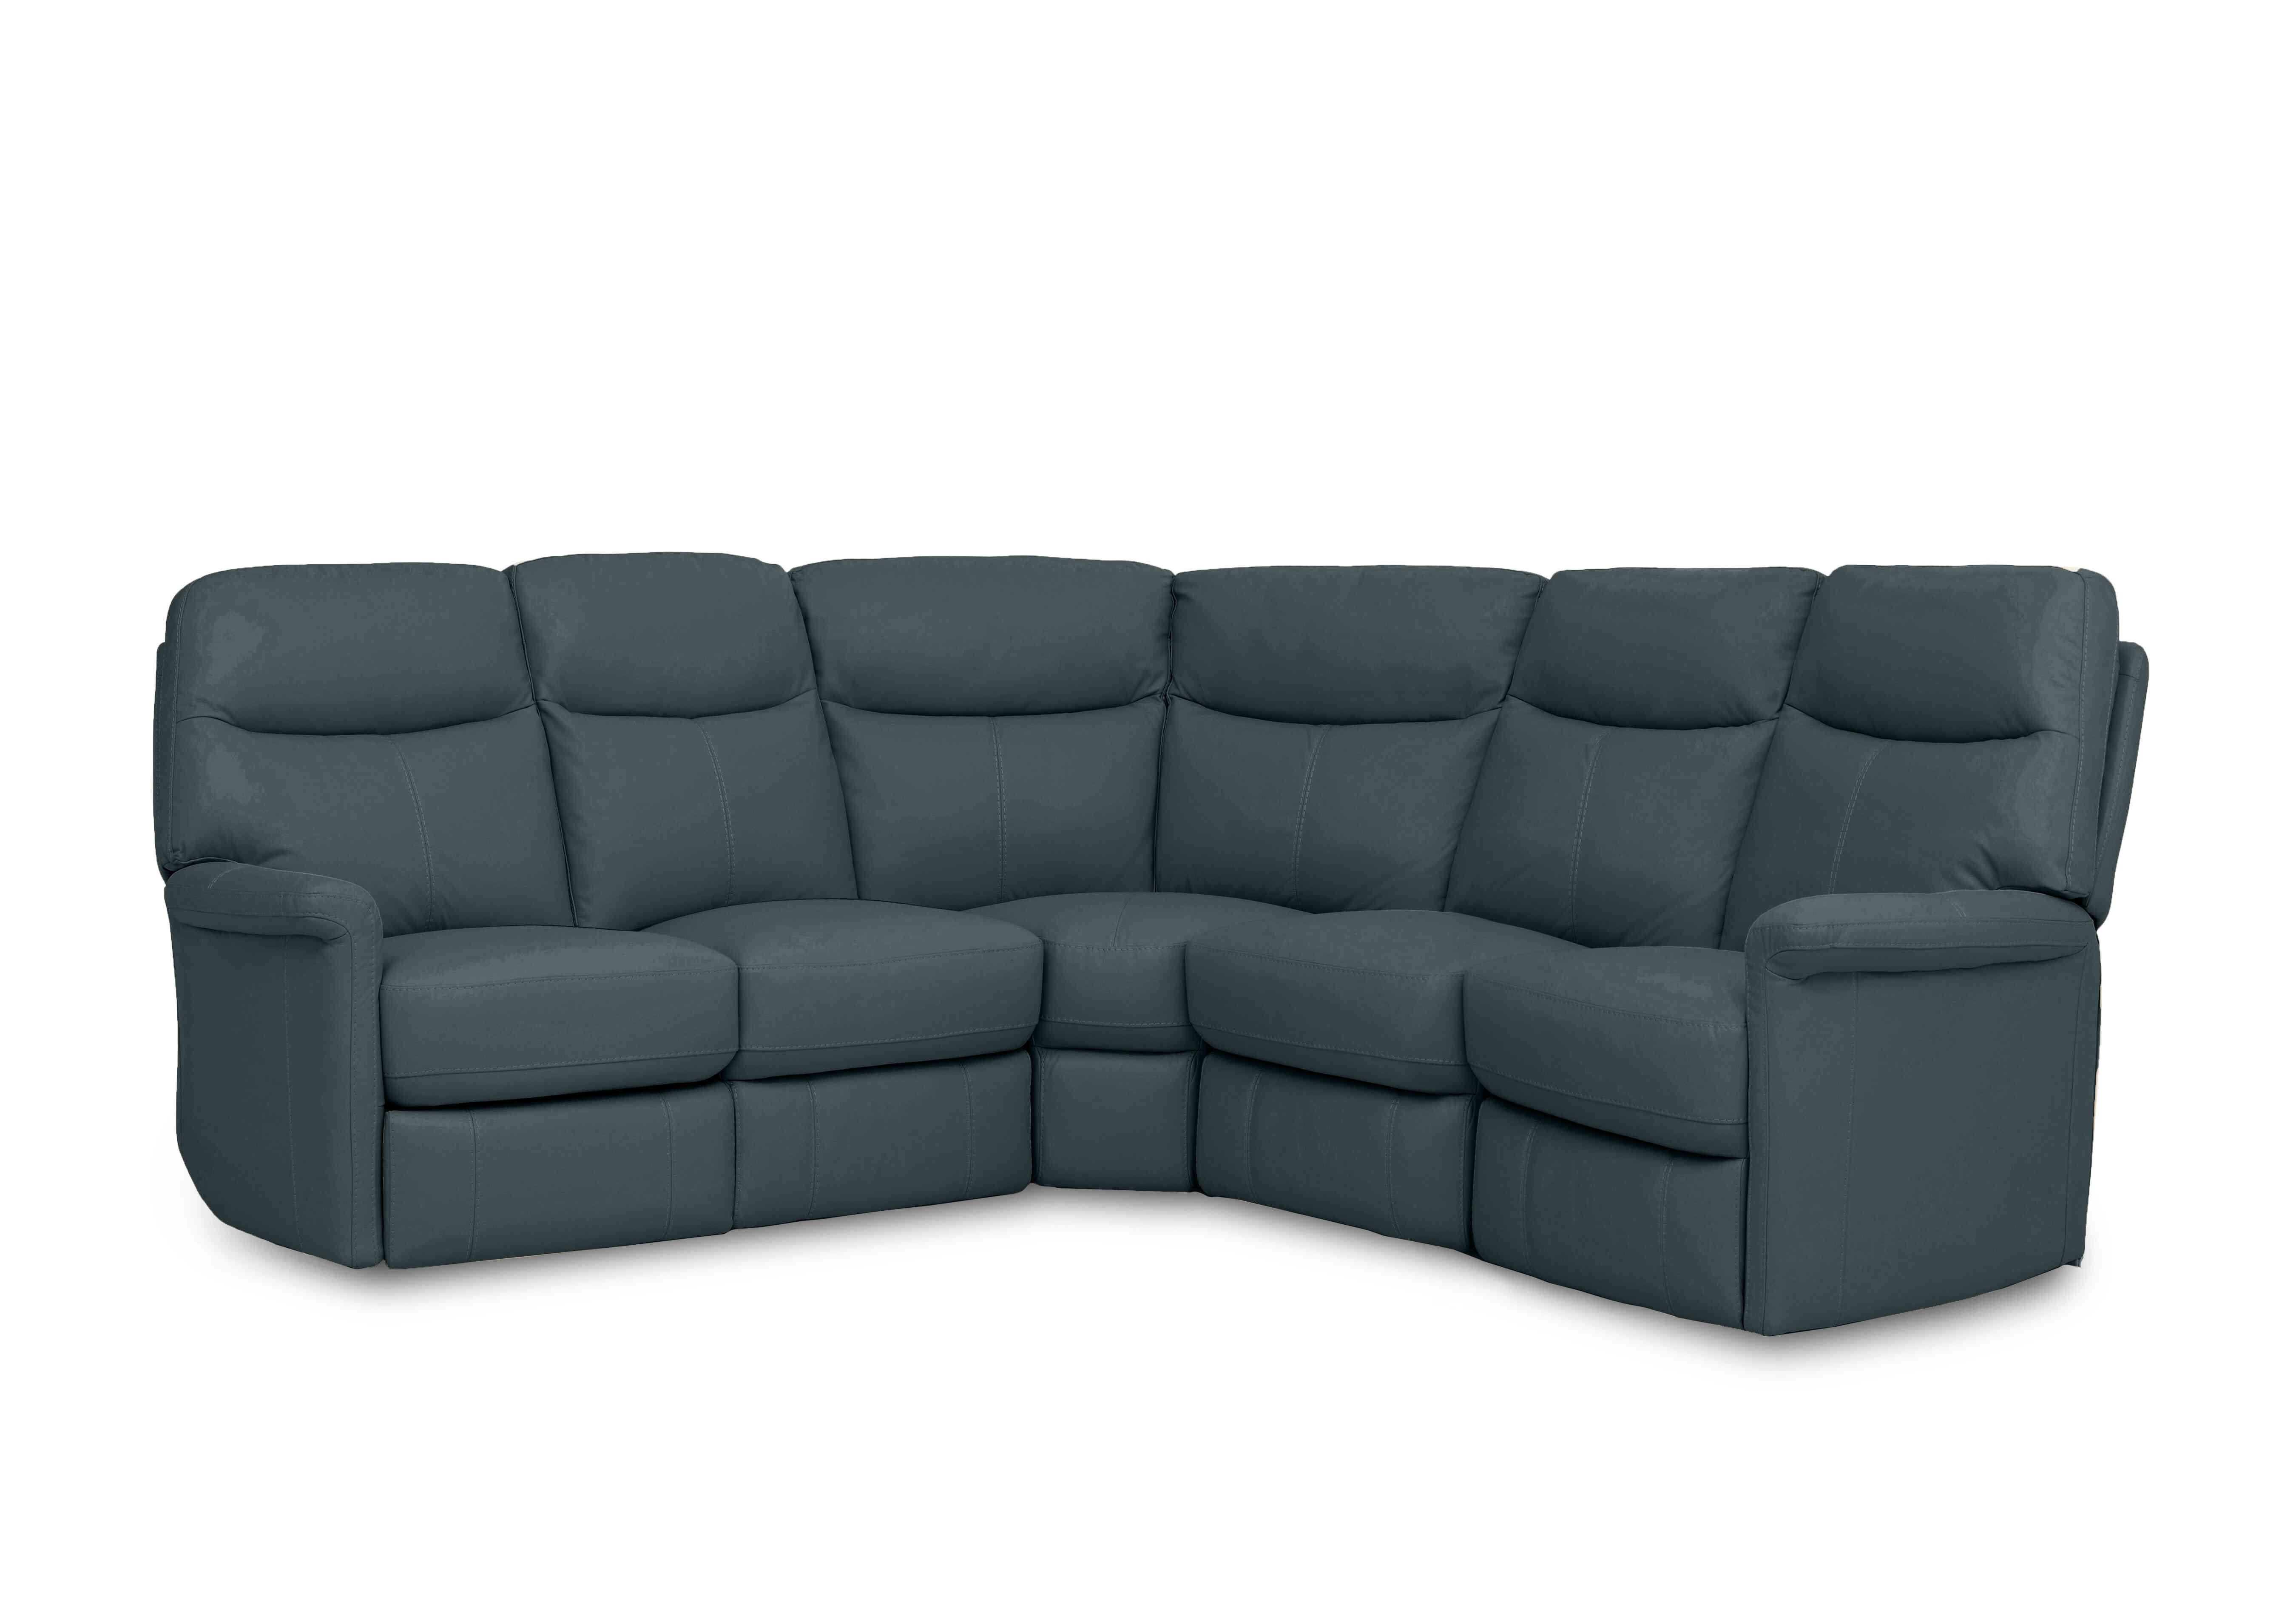 Compact Collection Lille Large Leather Corner Sofa in Bv-301e Lake Green on Furniture Village